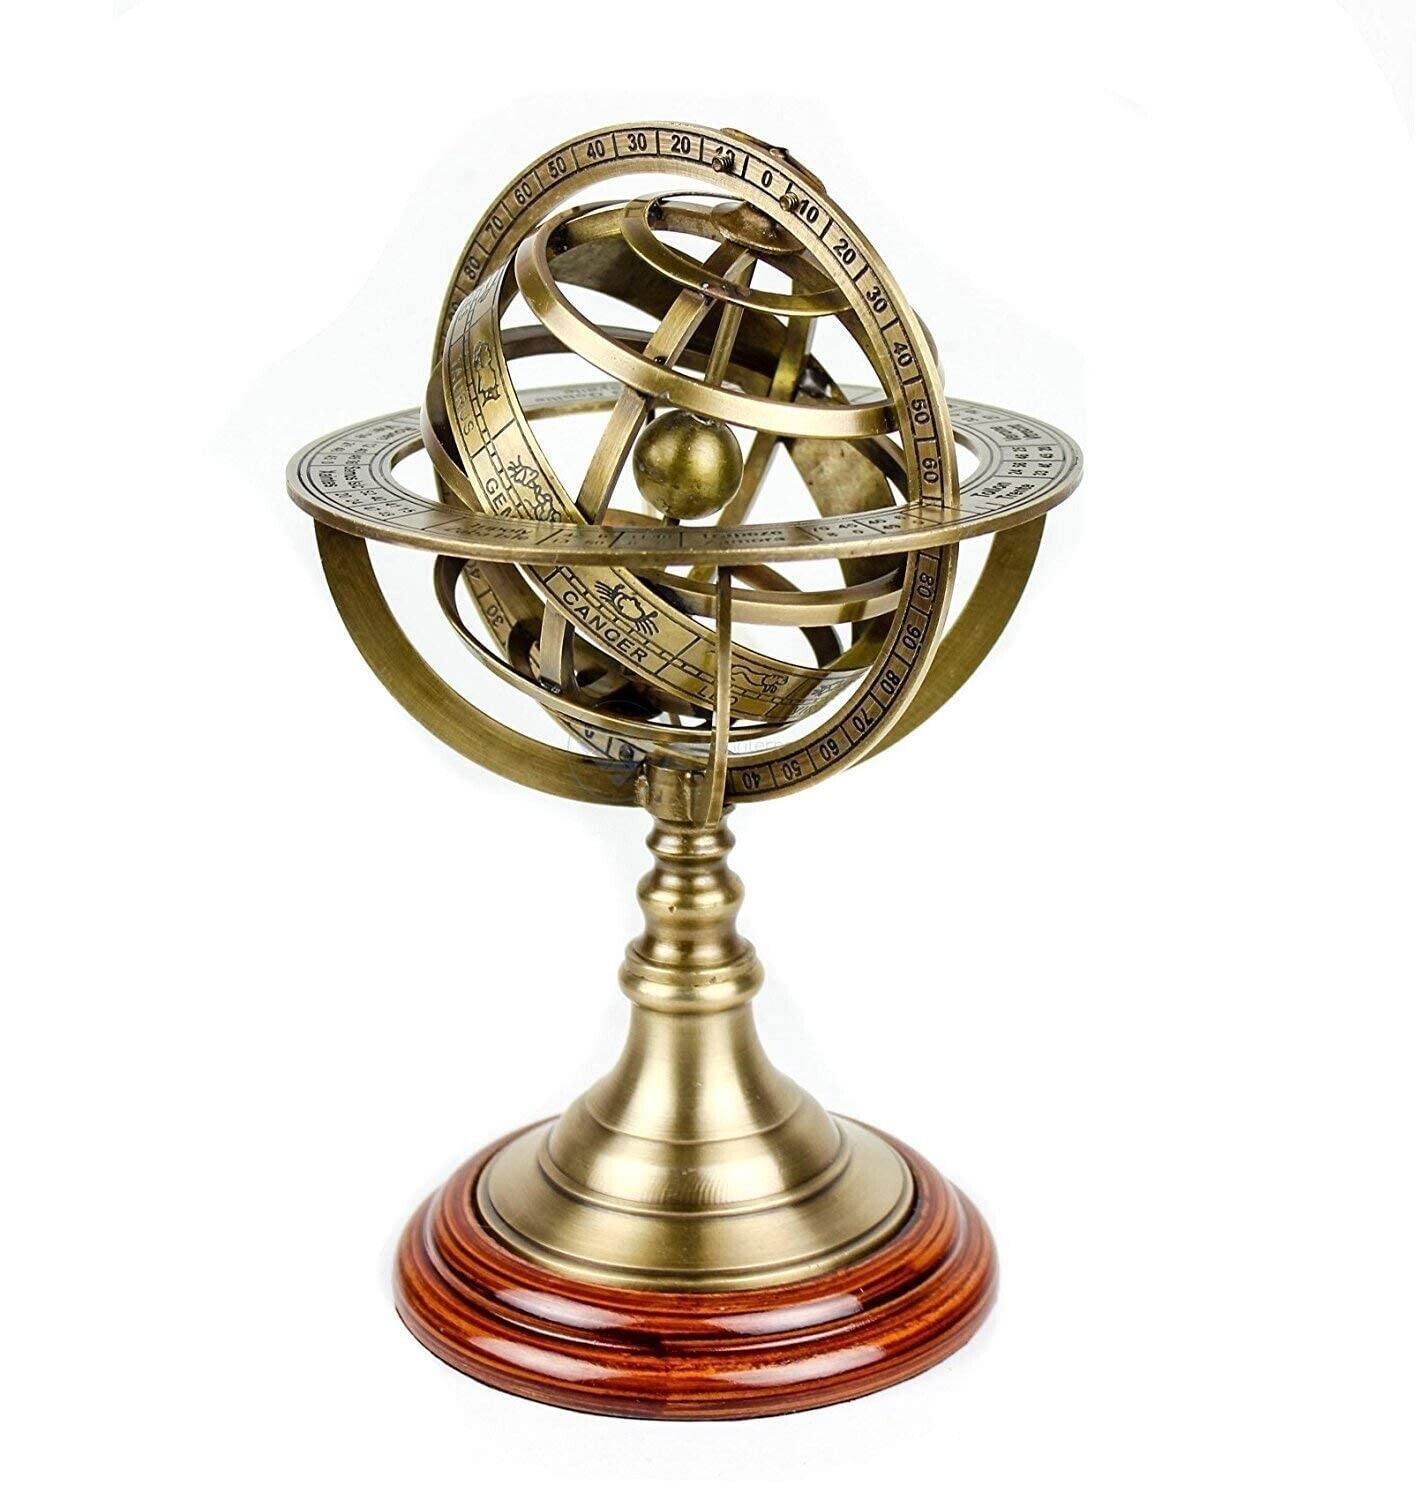 9 Inch Brass Royal Armillary Sphere Antique World Globe Wooden Base Table top